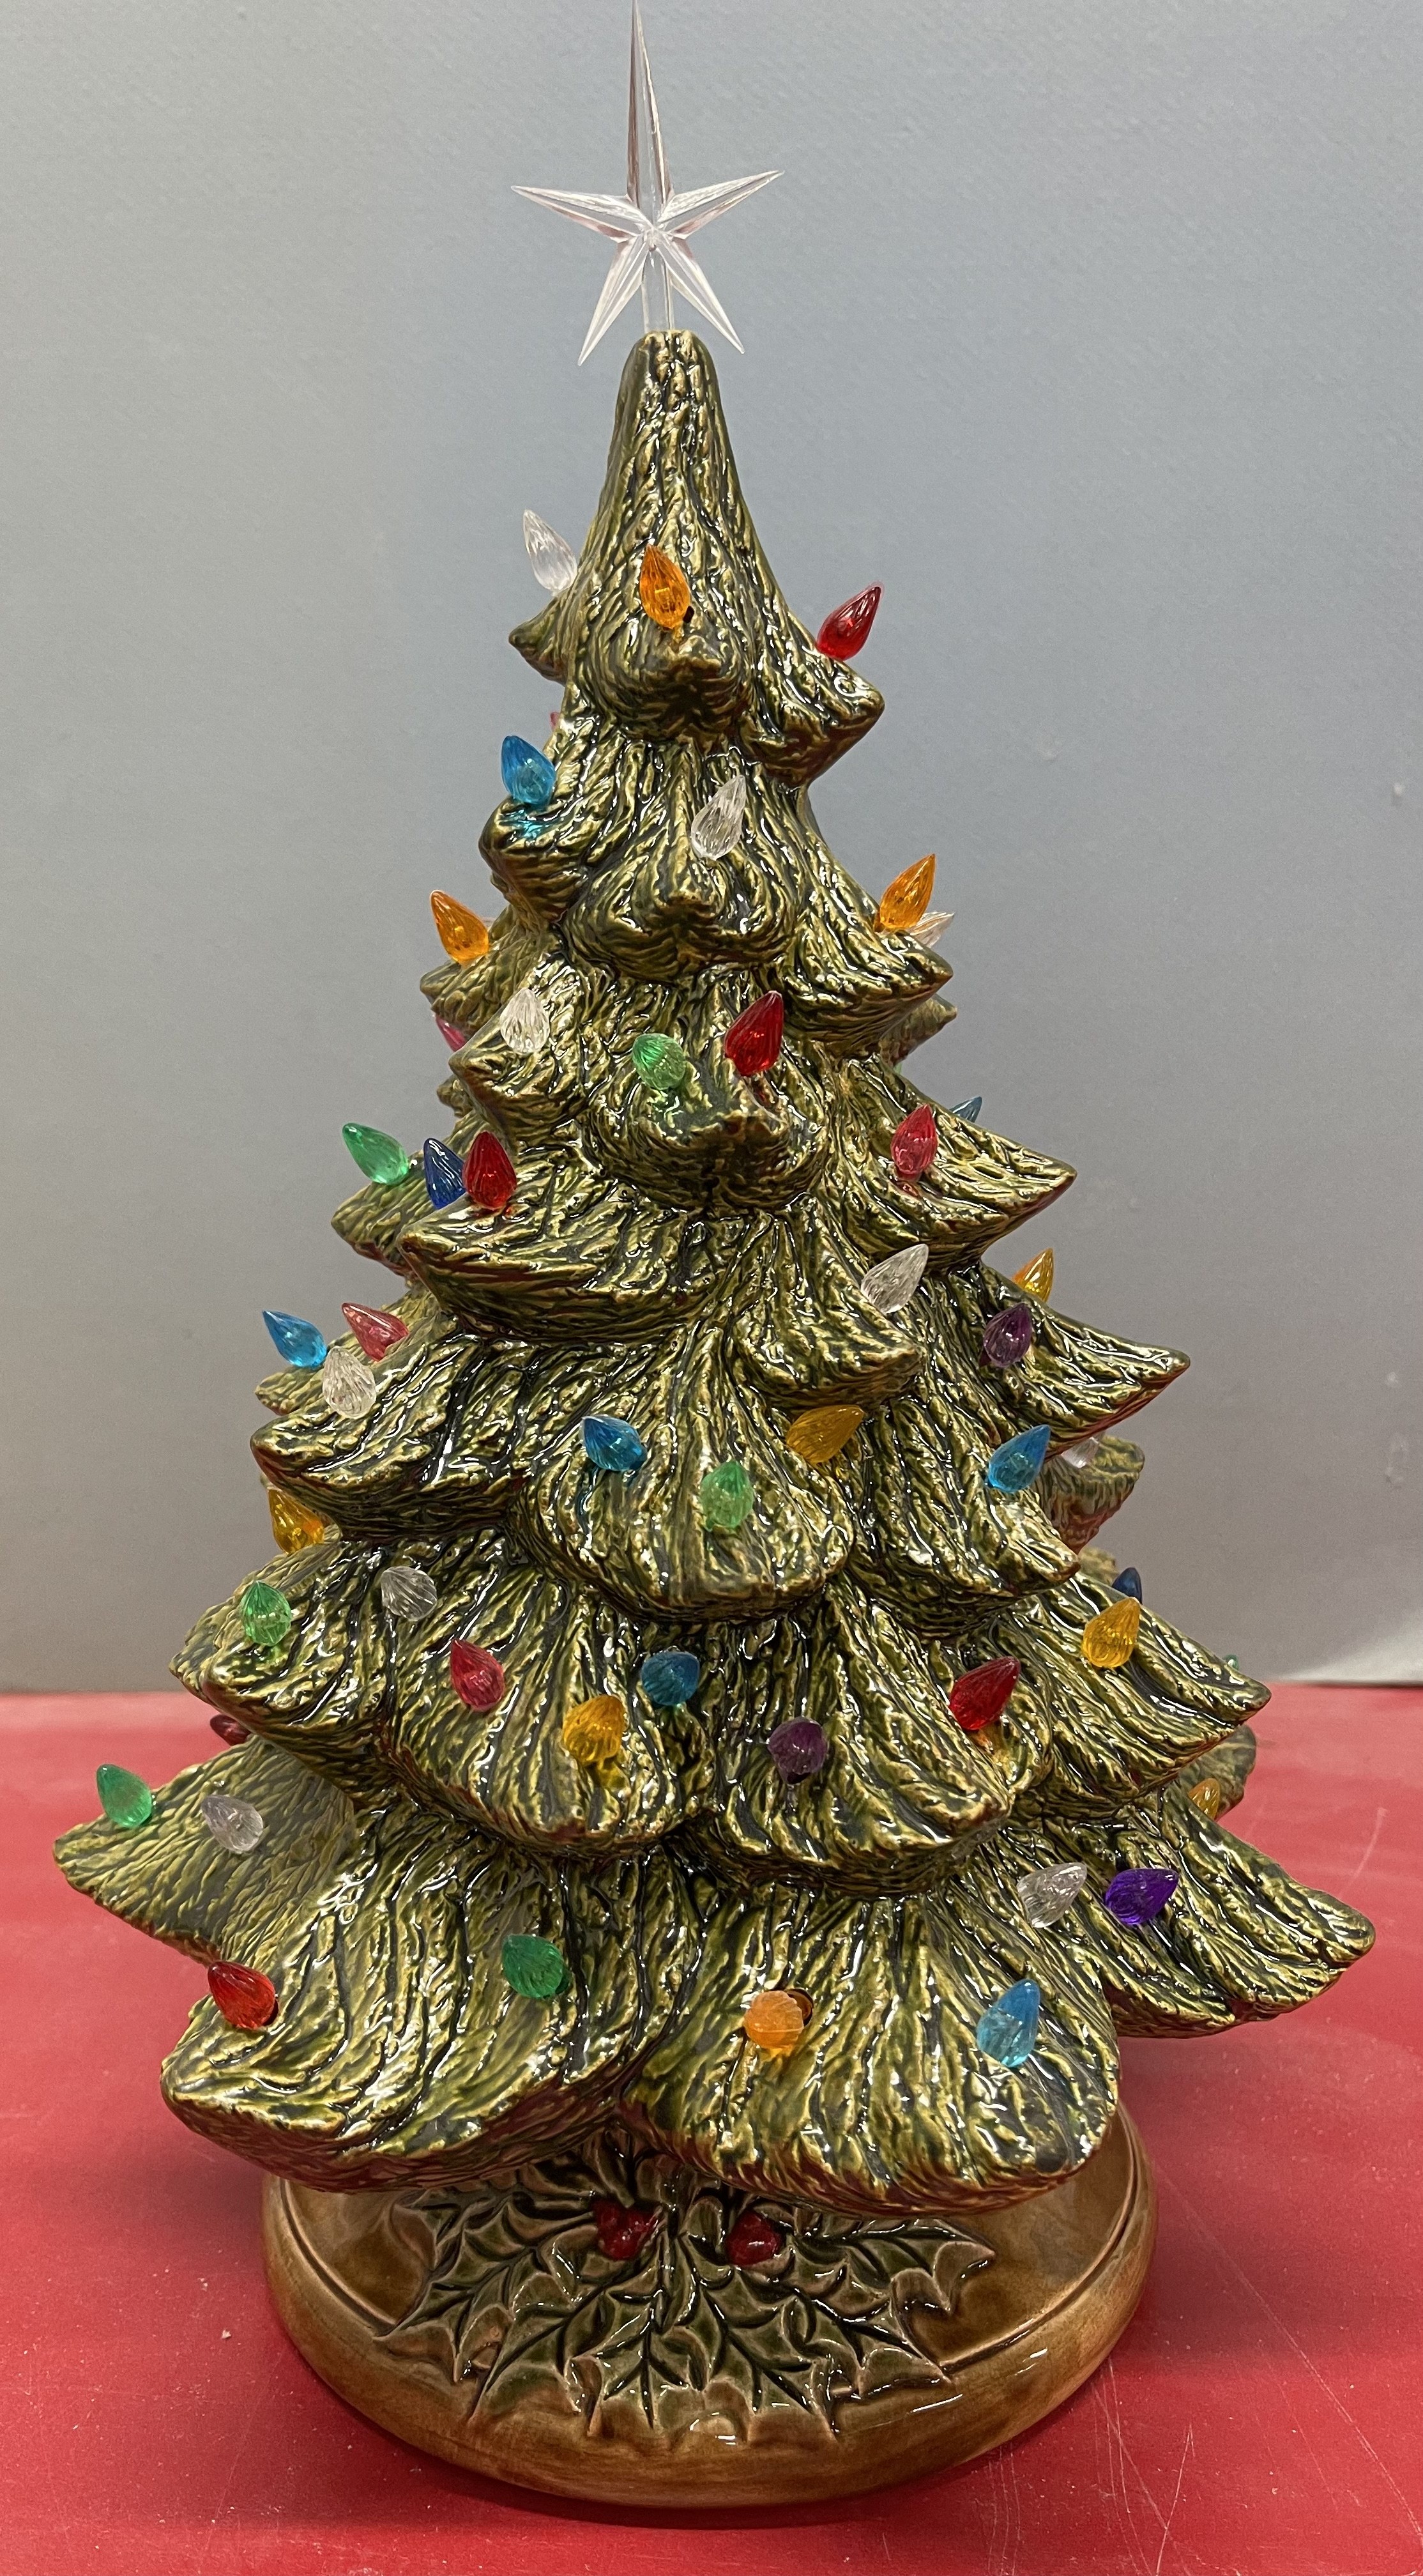 NW Christmas Tree/with base 13.5”x9.5”